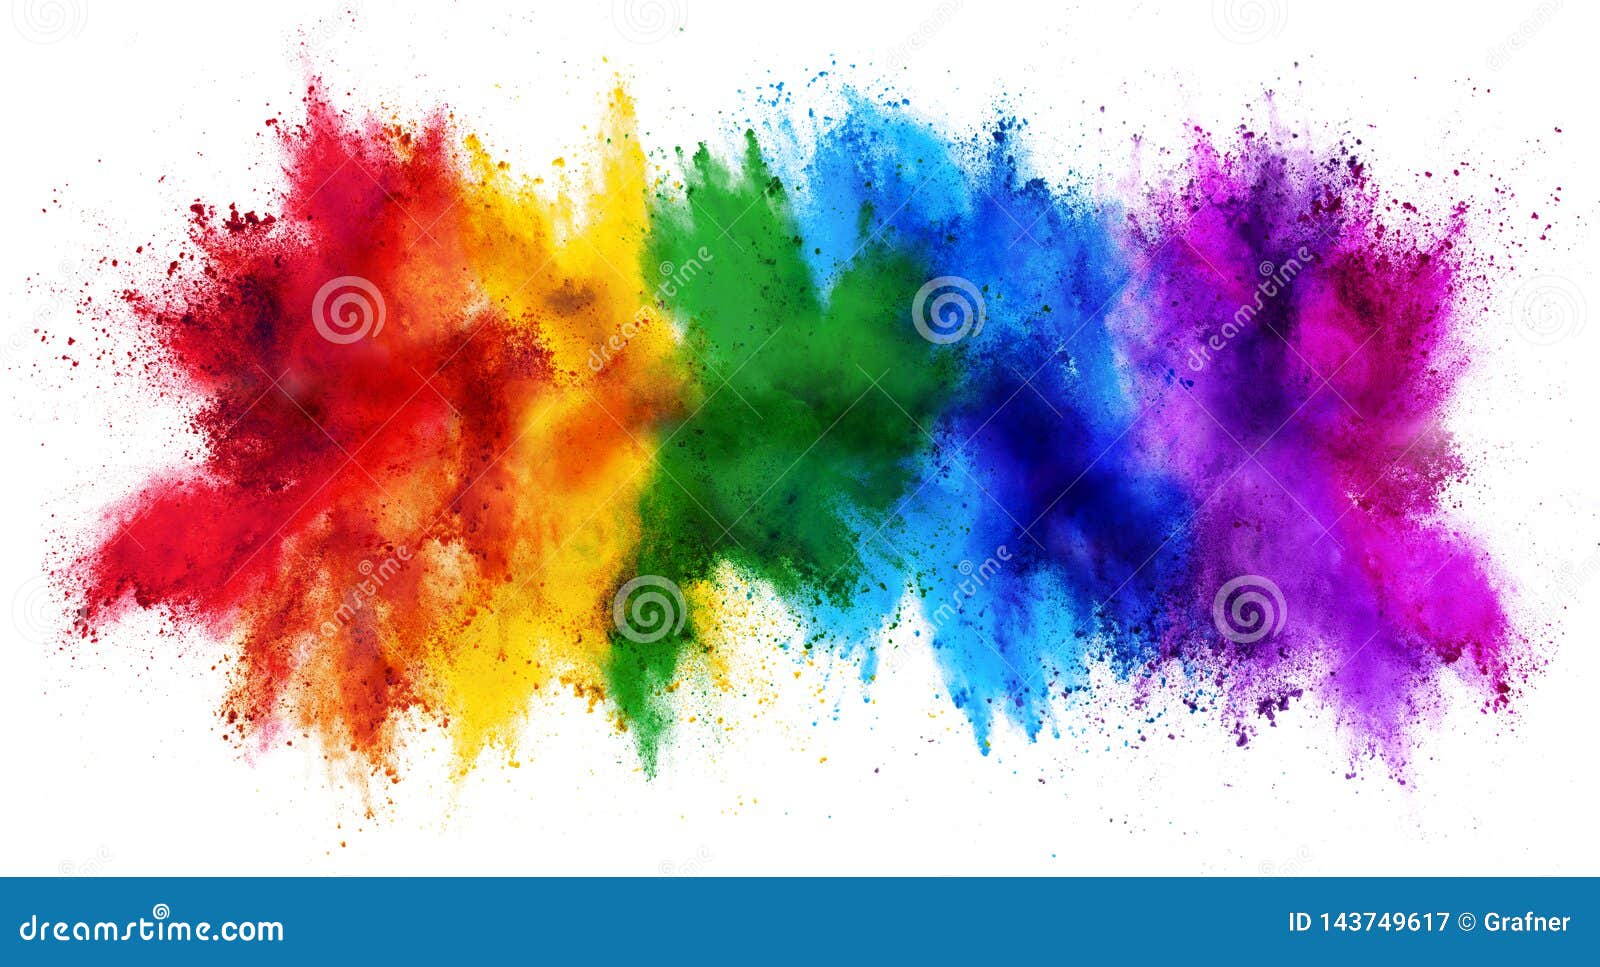 Illustration Colorful Happy Holi Background Festival Stock Vector Royalty  Free 1656379684  Shutterstock